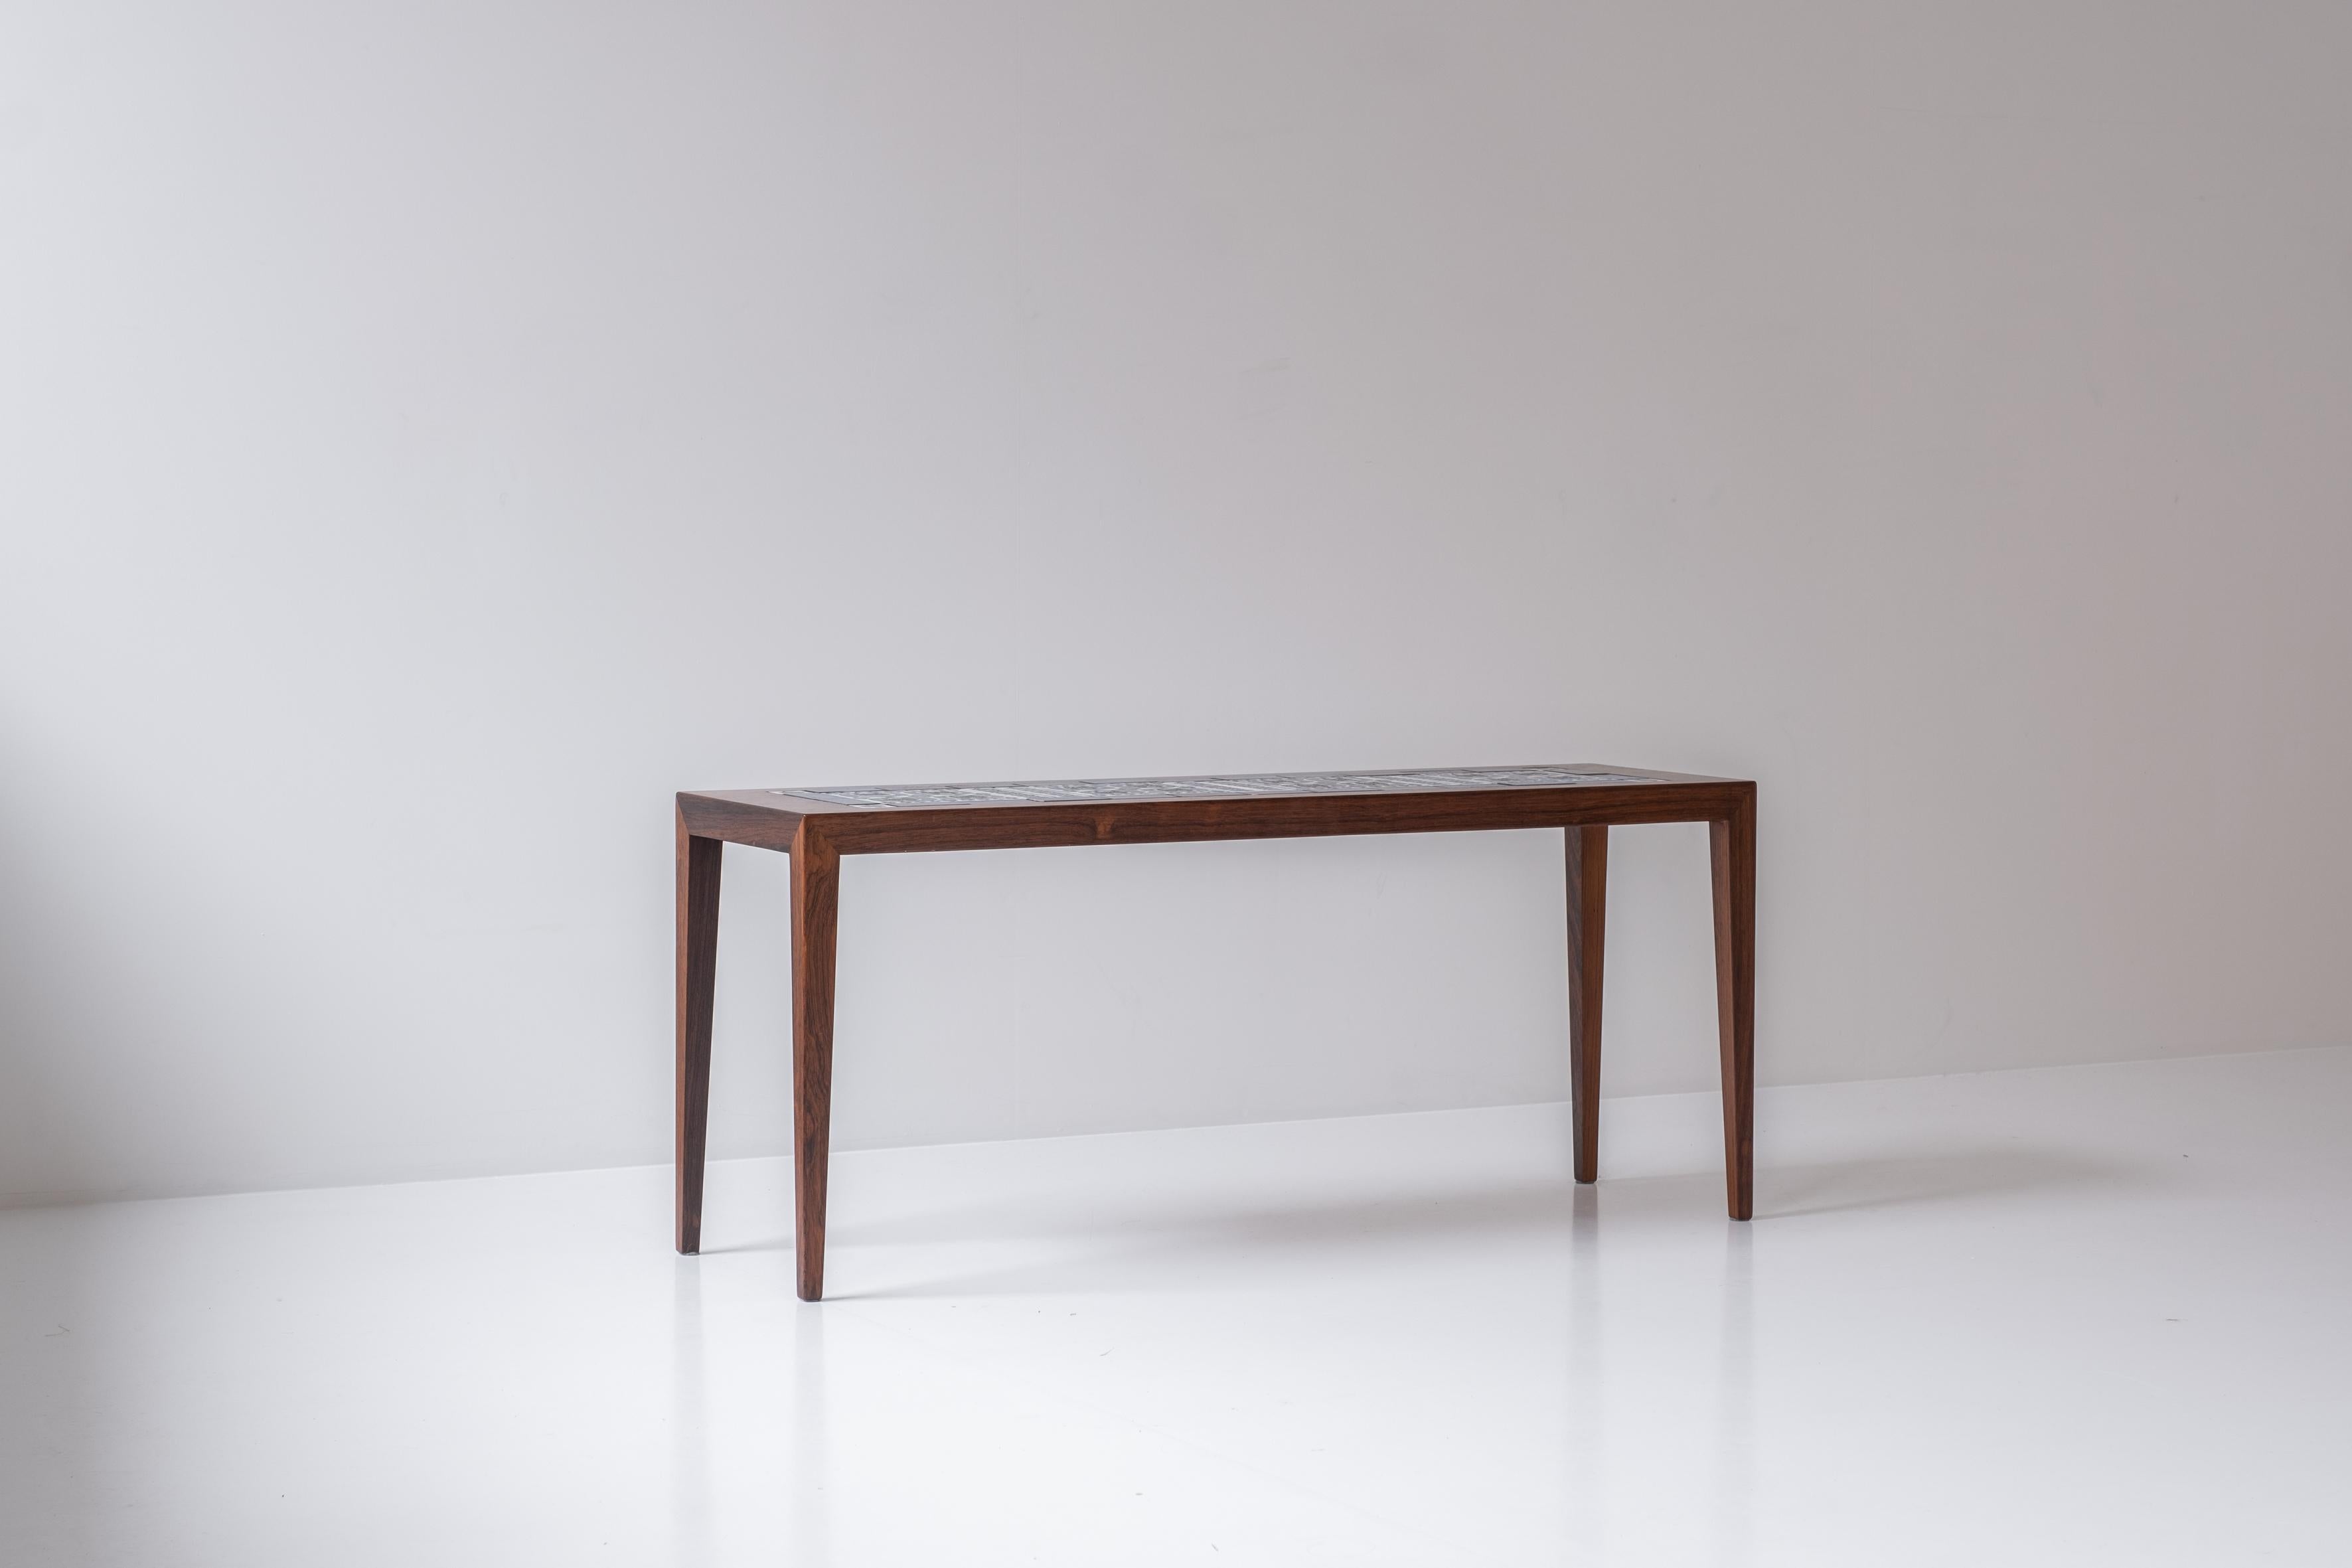 Side table by Severin Hansen for Haslev, Denmark, 1965. This table is made out of rosewood and has ceramic tiles in the top from the “Tenera” series by Nils Thorsson for Royal Copenhagen. Labeled. Clean lines. Mint condition!